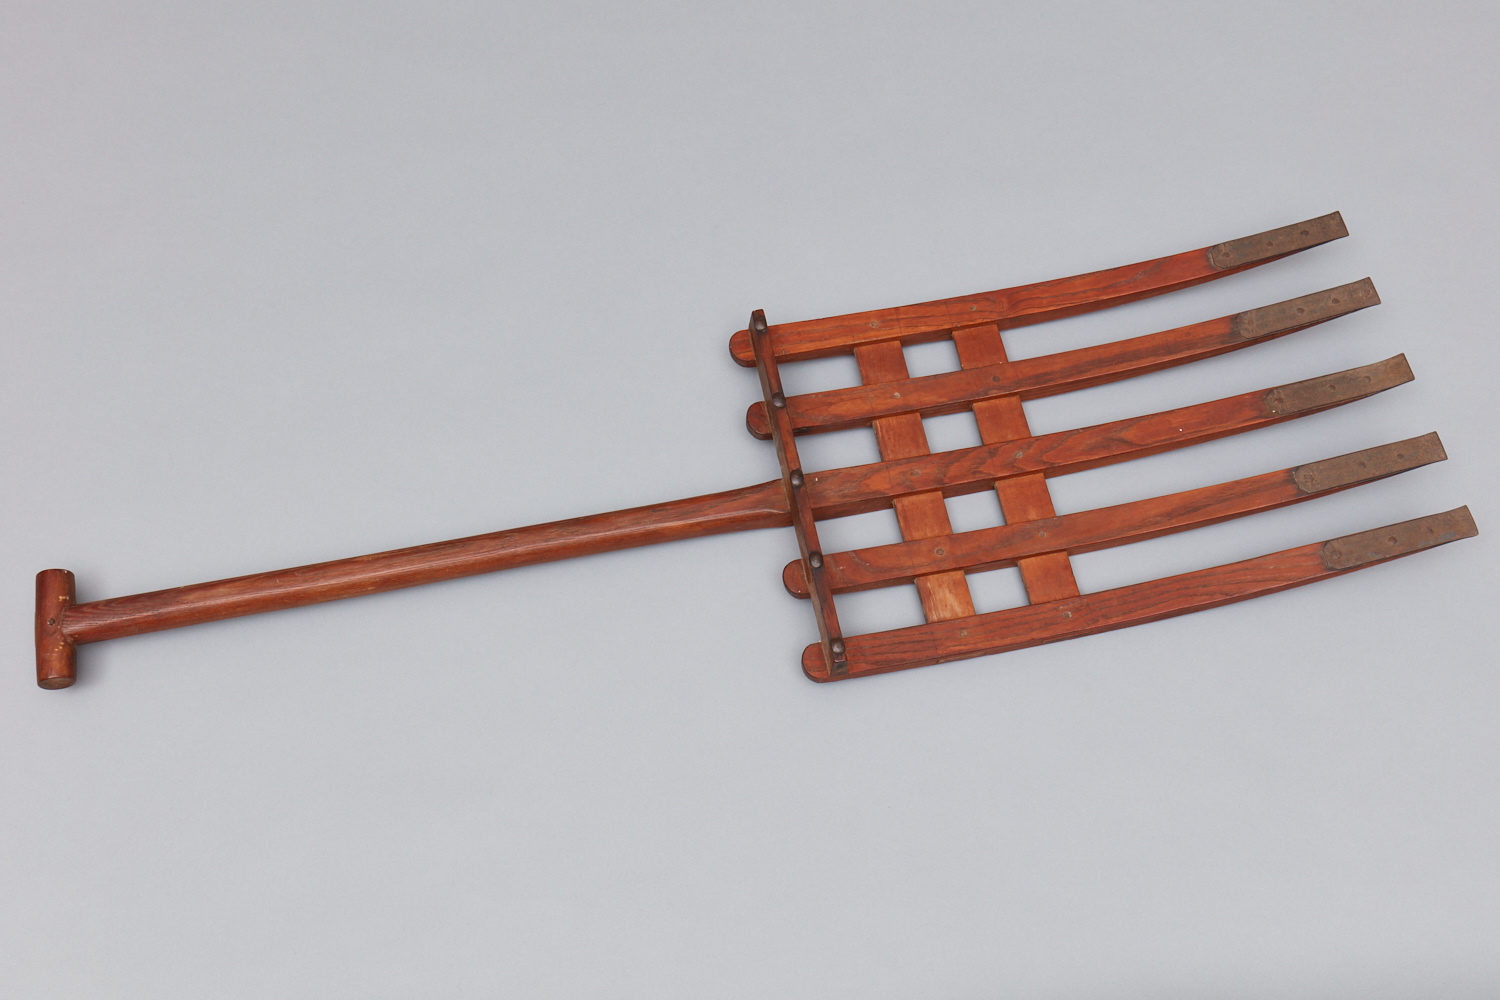 A wooden pitchfork with four blades.